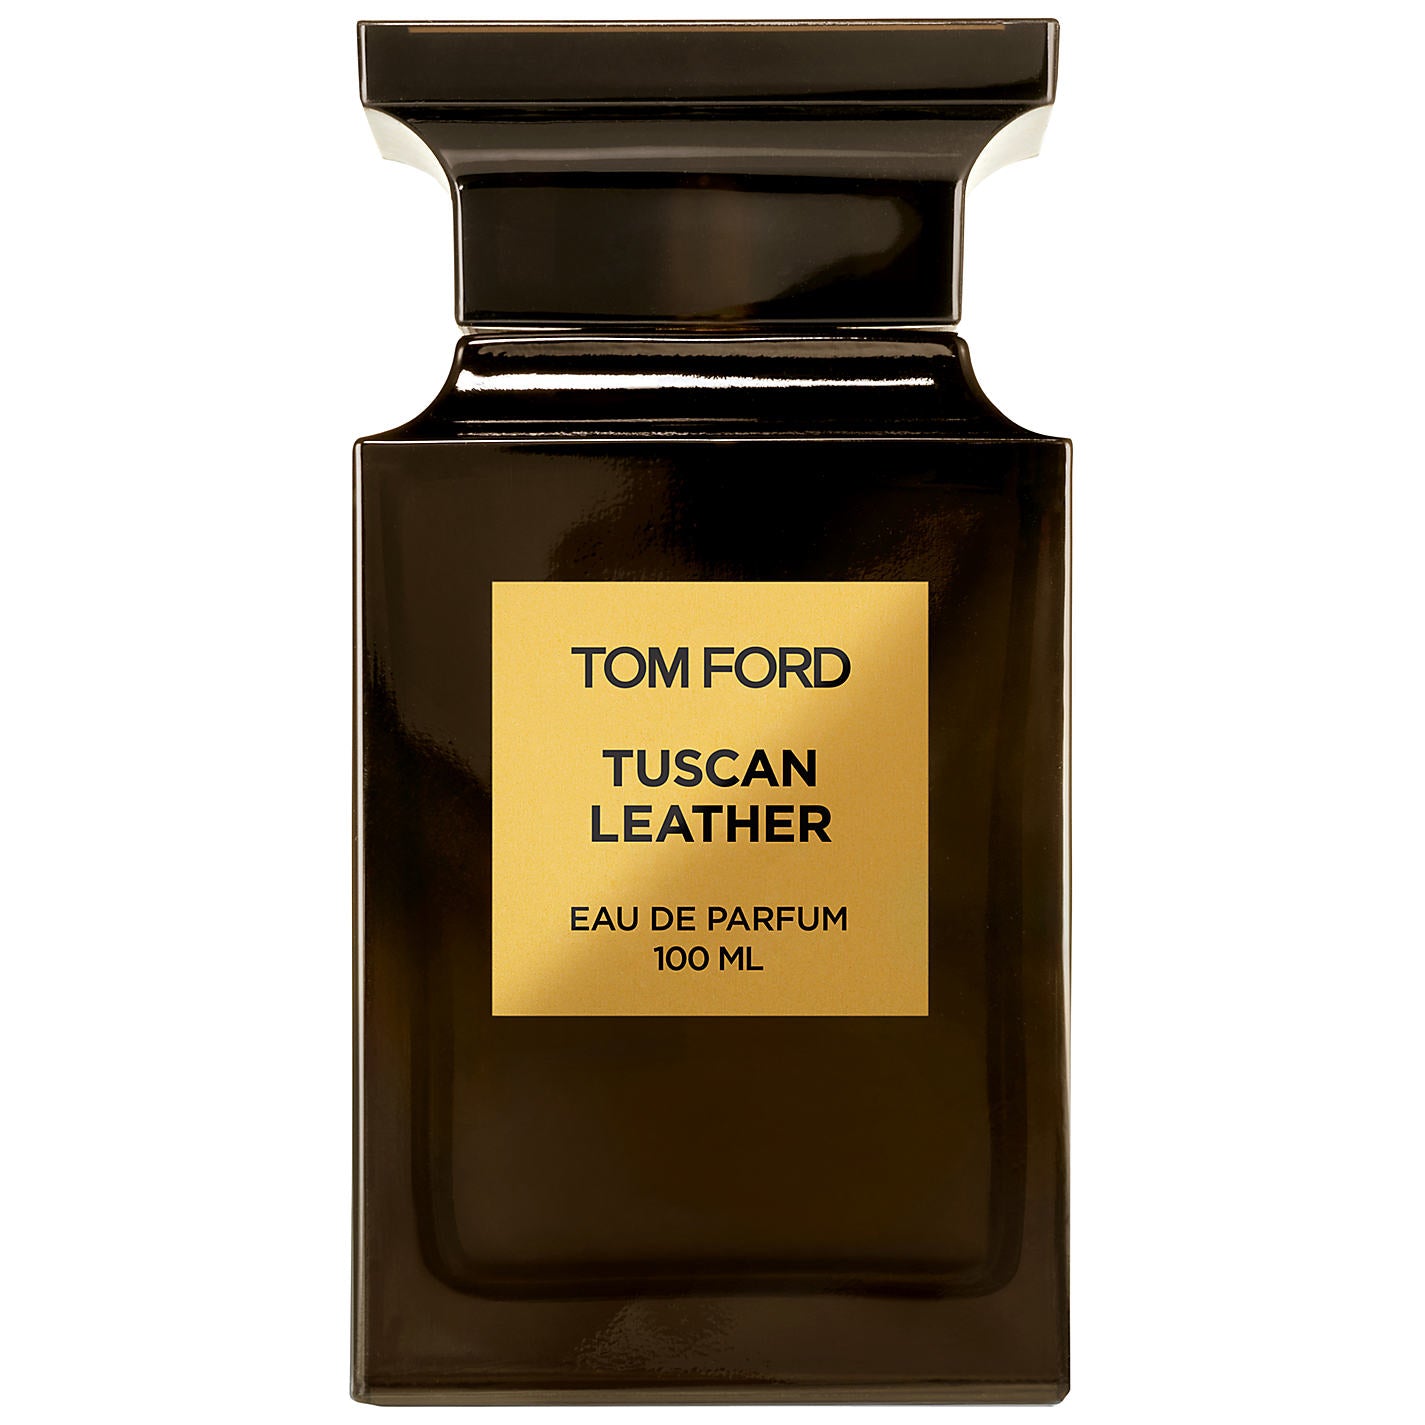 main accords

leather 


animalic 


sweet 


smoky 


fruity 


woody 



Pictures
Tuscan Leather Tom Ford for women and men Pictures 


Private Blend is first and exclusive collection by Tom Ford, which includes twelve eau de parfums, each of them can be used solely or in combination with other fragrances from the collection. 
 Private Blend Collection was launched in 2007. The fragrances are available in 50ml and 250ml bottles. 


"PRIVATE BLEND is my own scent laboratory: it's where I have the ability to create very special, original fragrances that are unconstrained by the conventions of mainstream scent-making. PRIVATE BLEND is designed with the true fragrance connoisseur n mind." Tom Ford